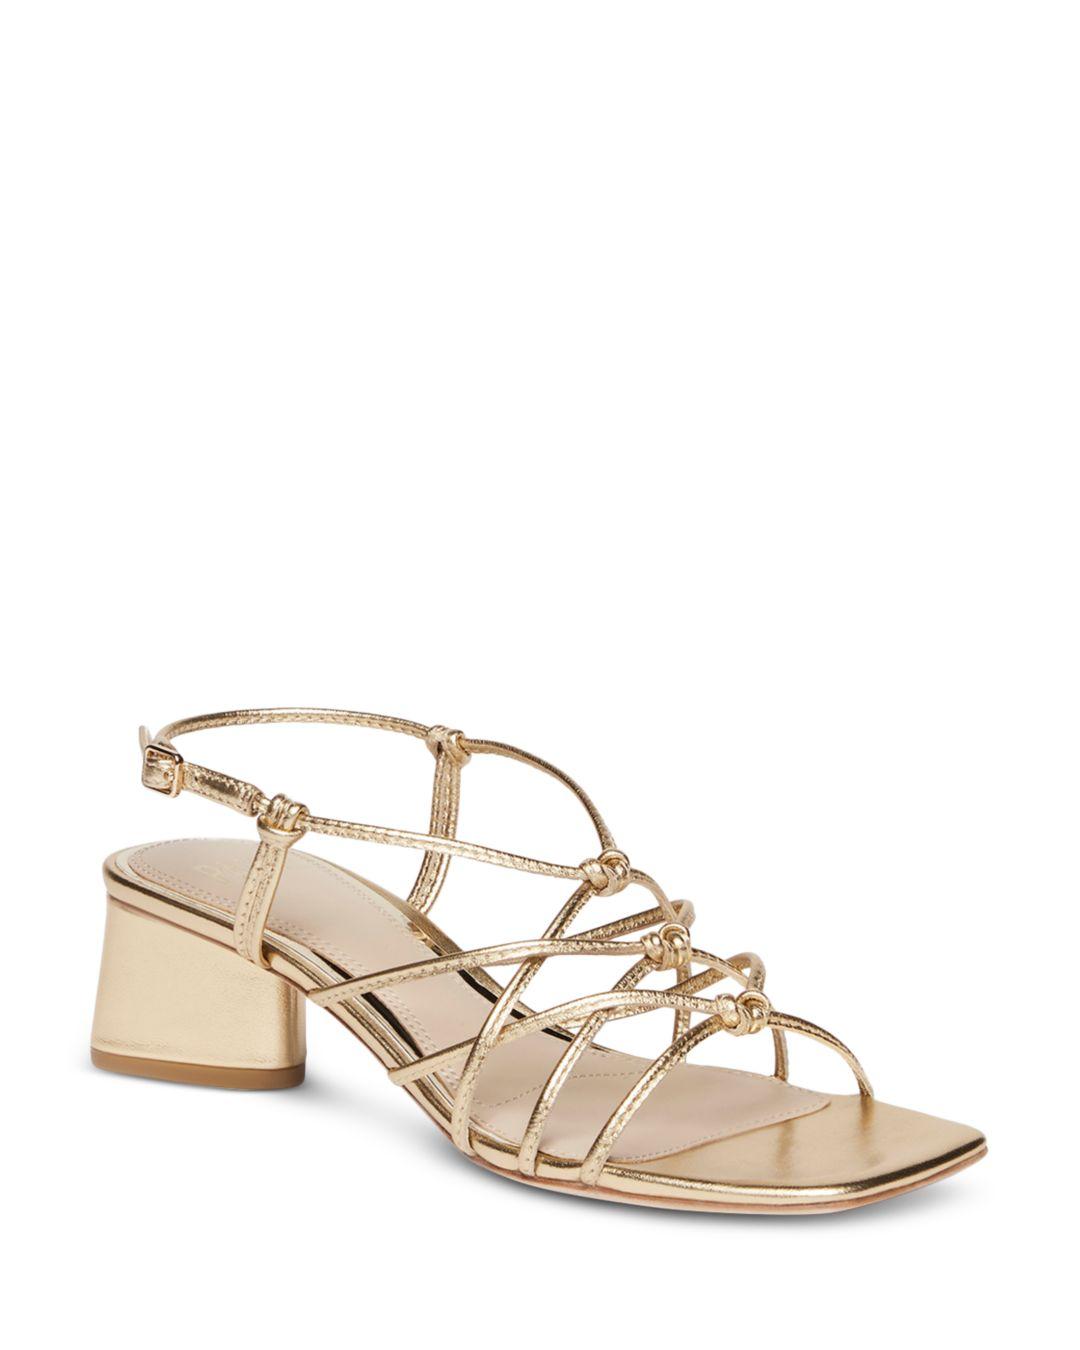 PAIGE Gianna Square Toe Strappy Block Heel Sandals in Natural | Lyst